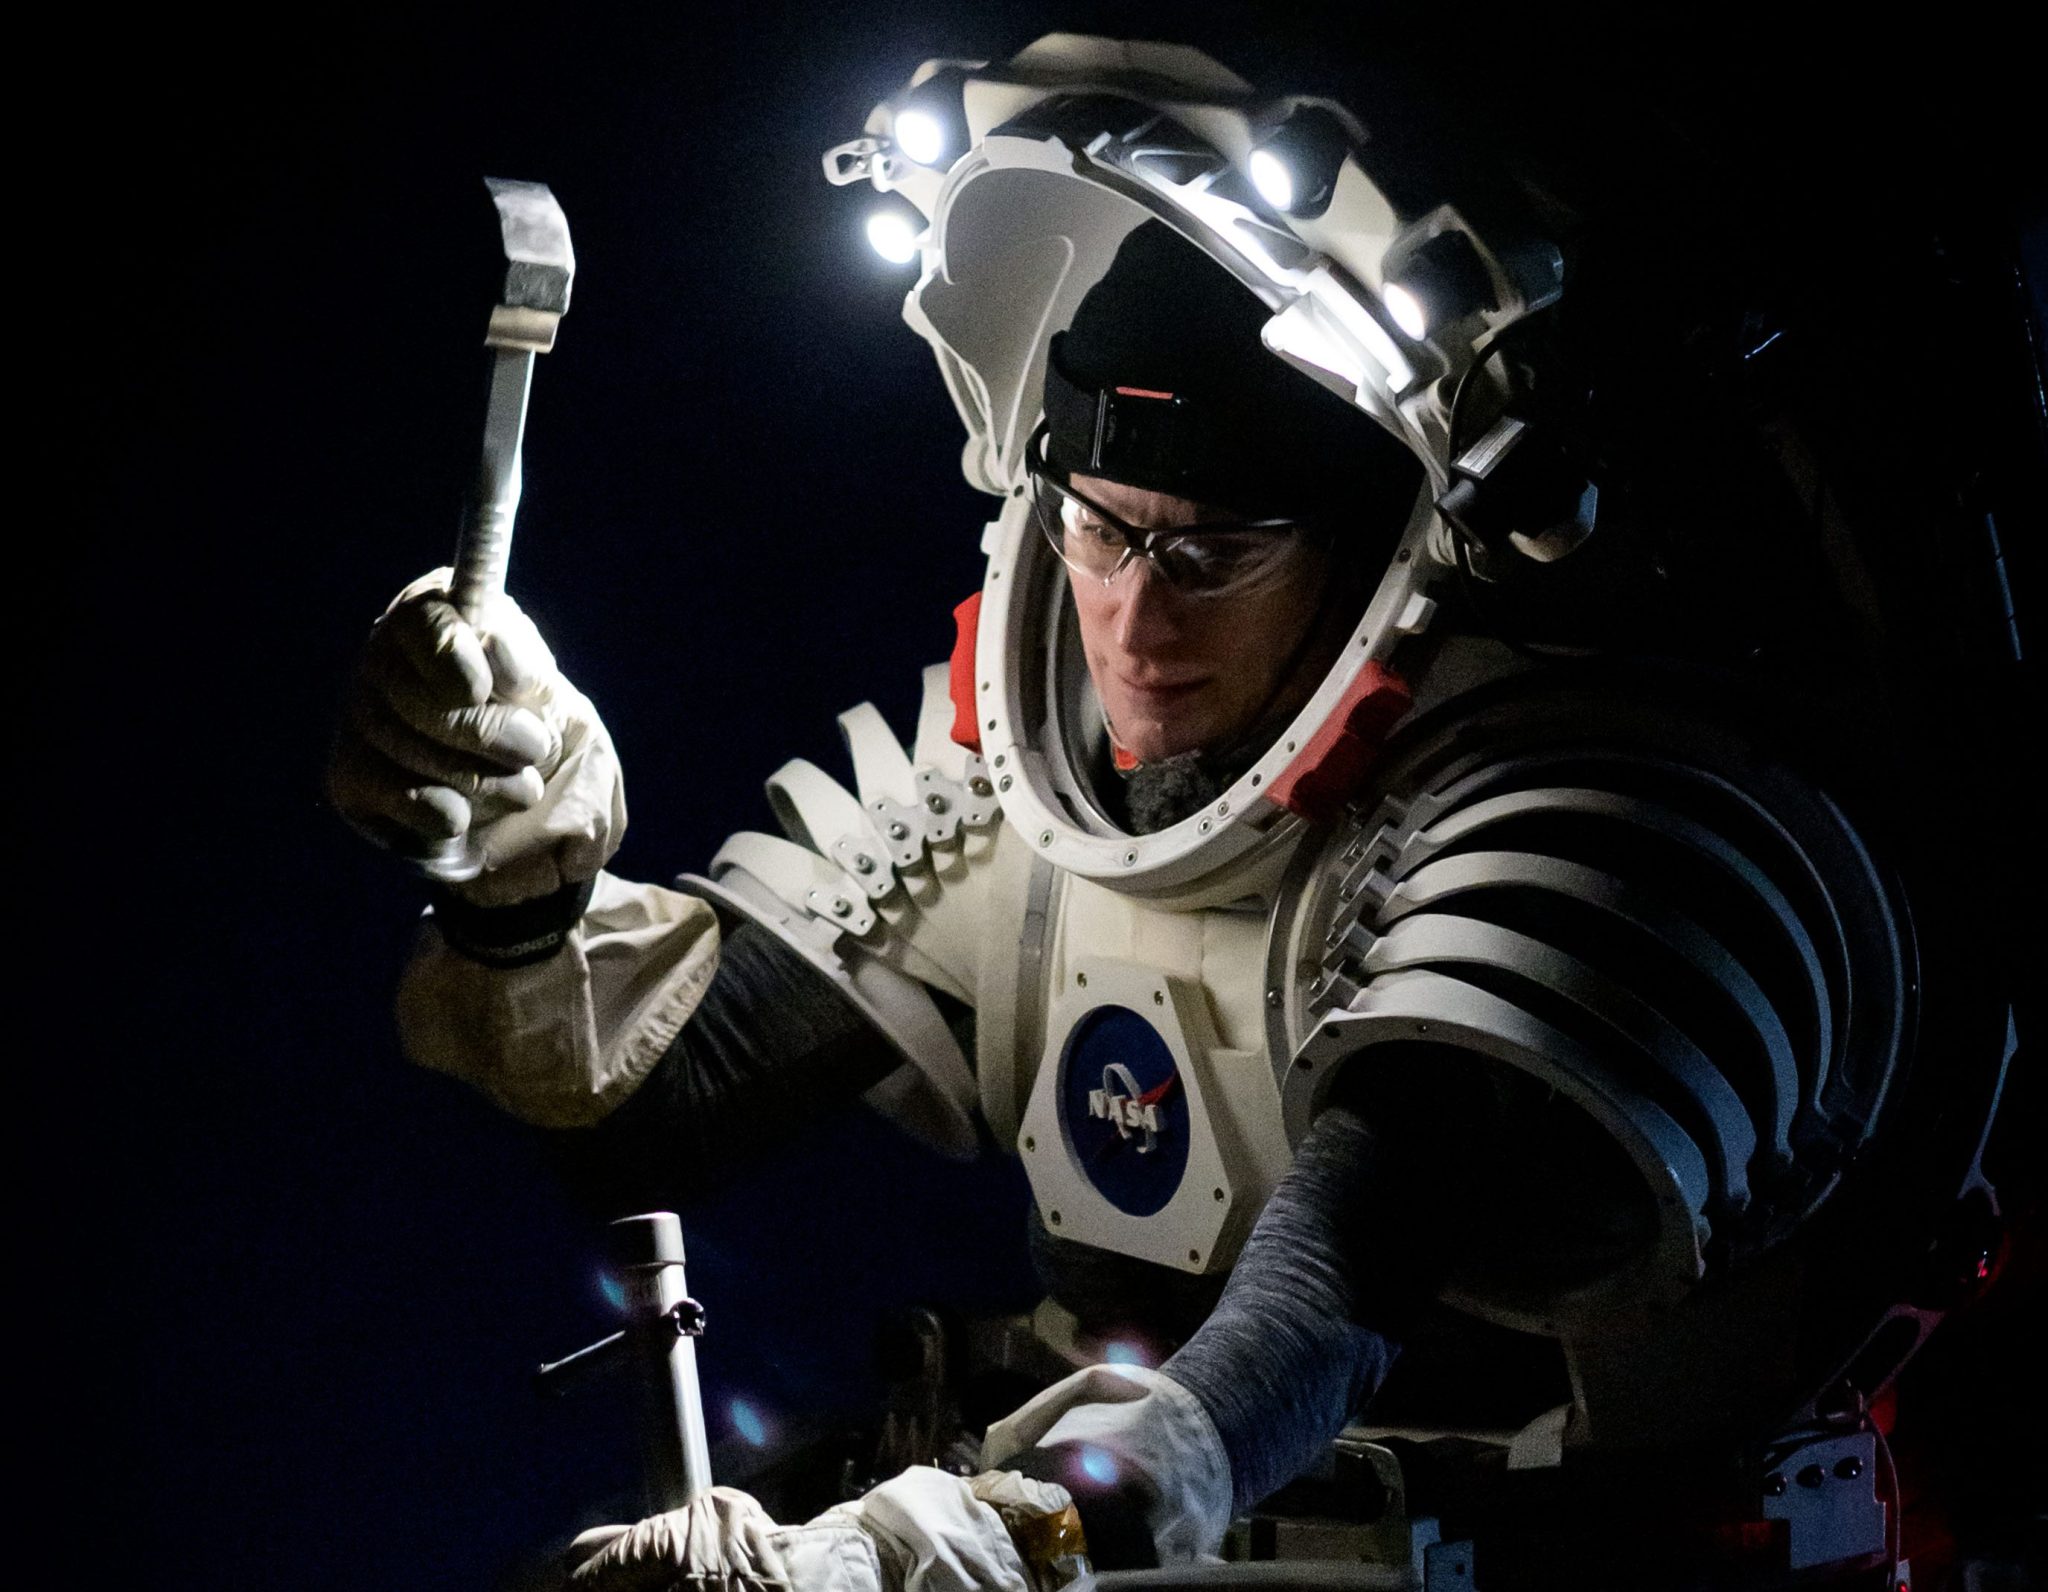 NASA astronaut wearing a mockup spacesuit system, illuminated by the lights on her helmet as she hammers a drive tube into the ground.